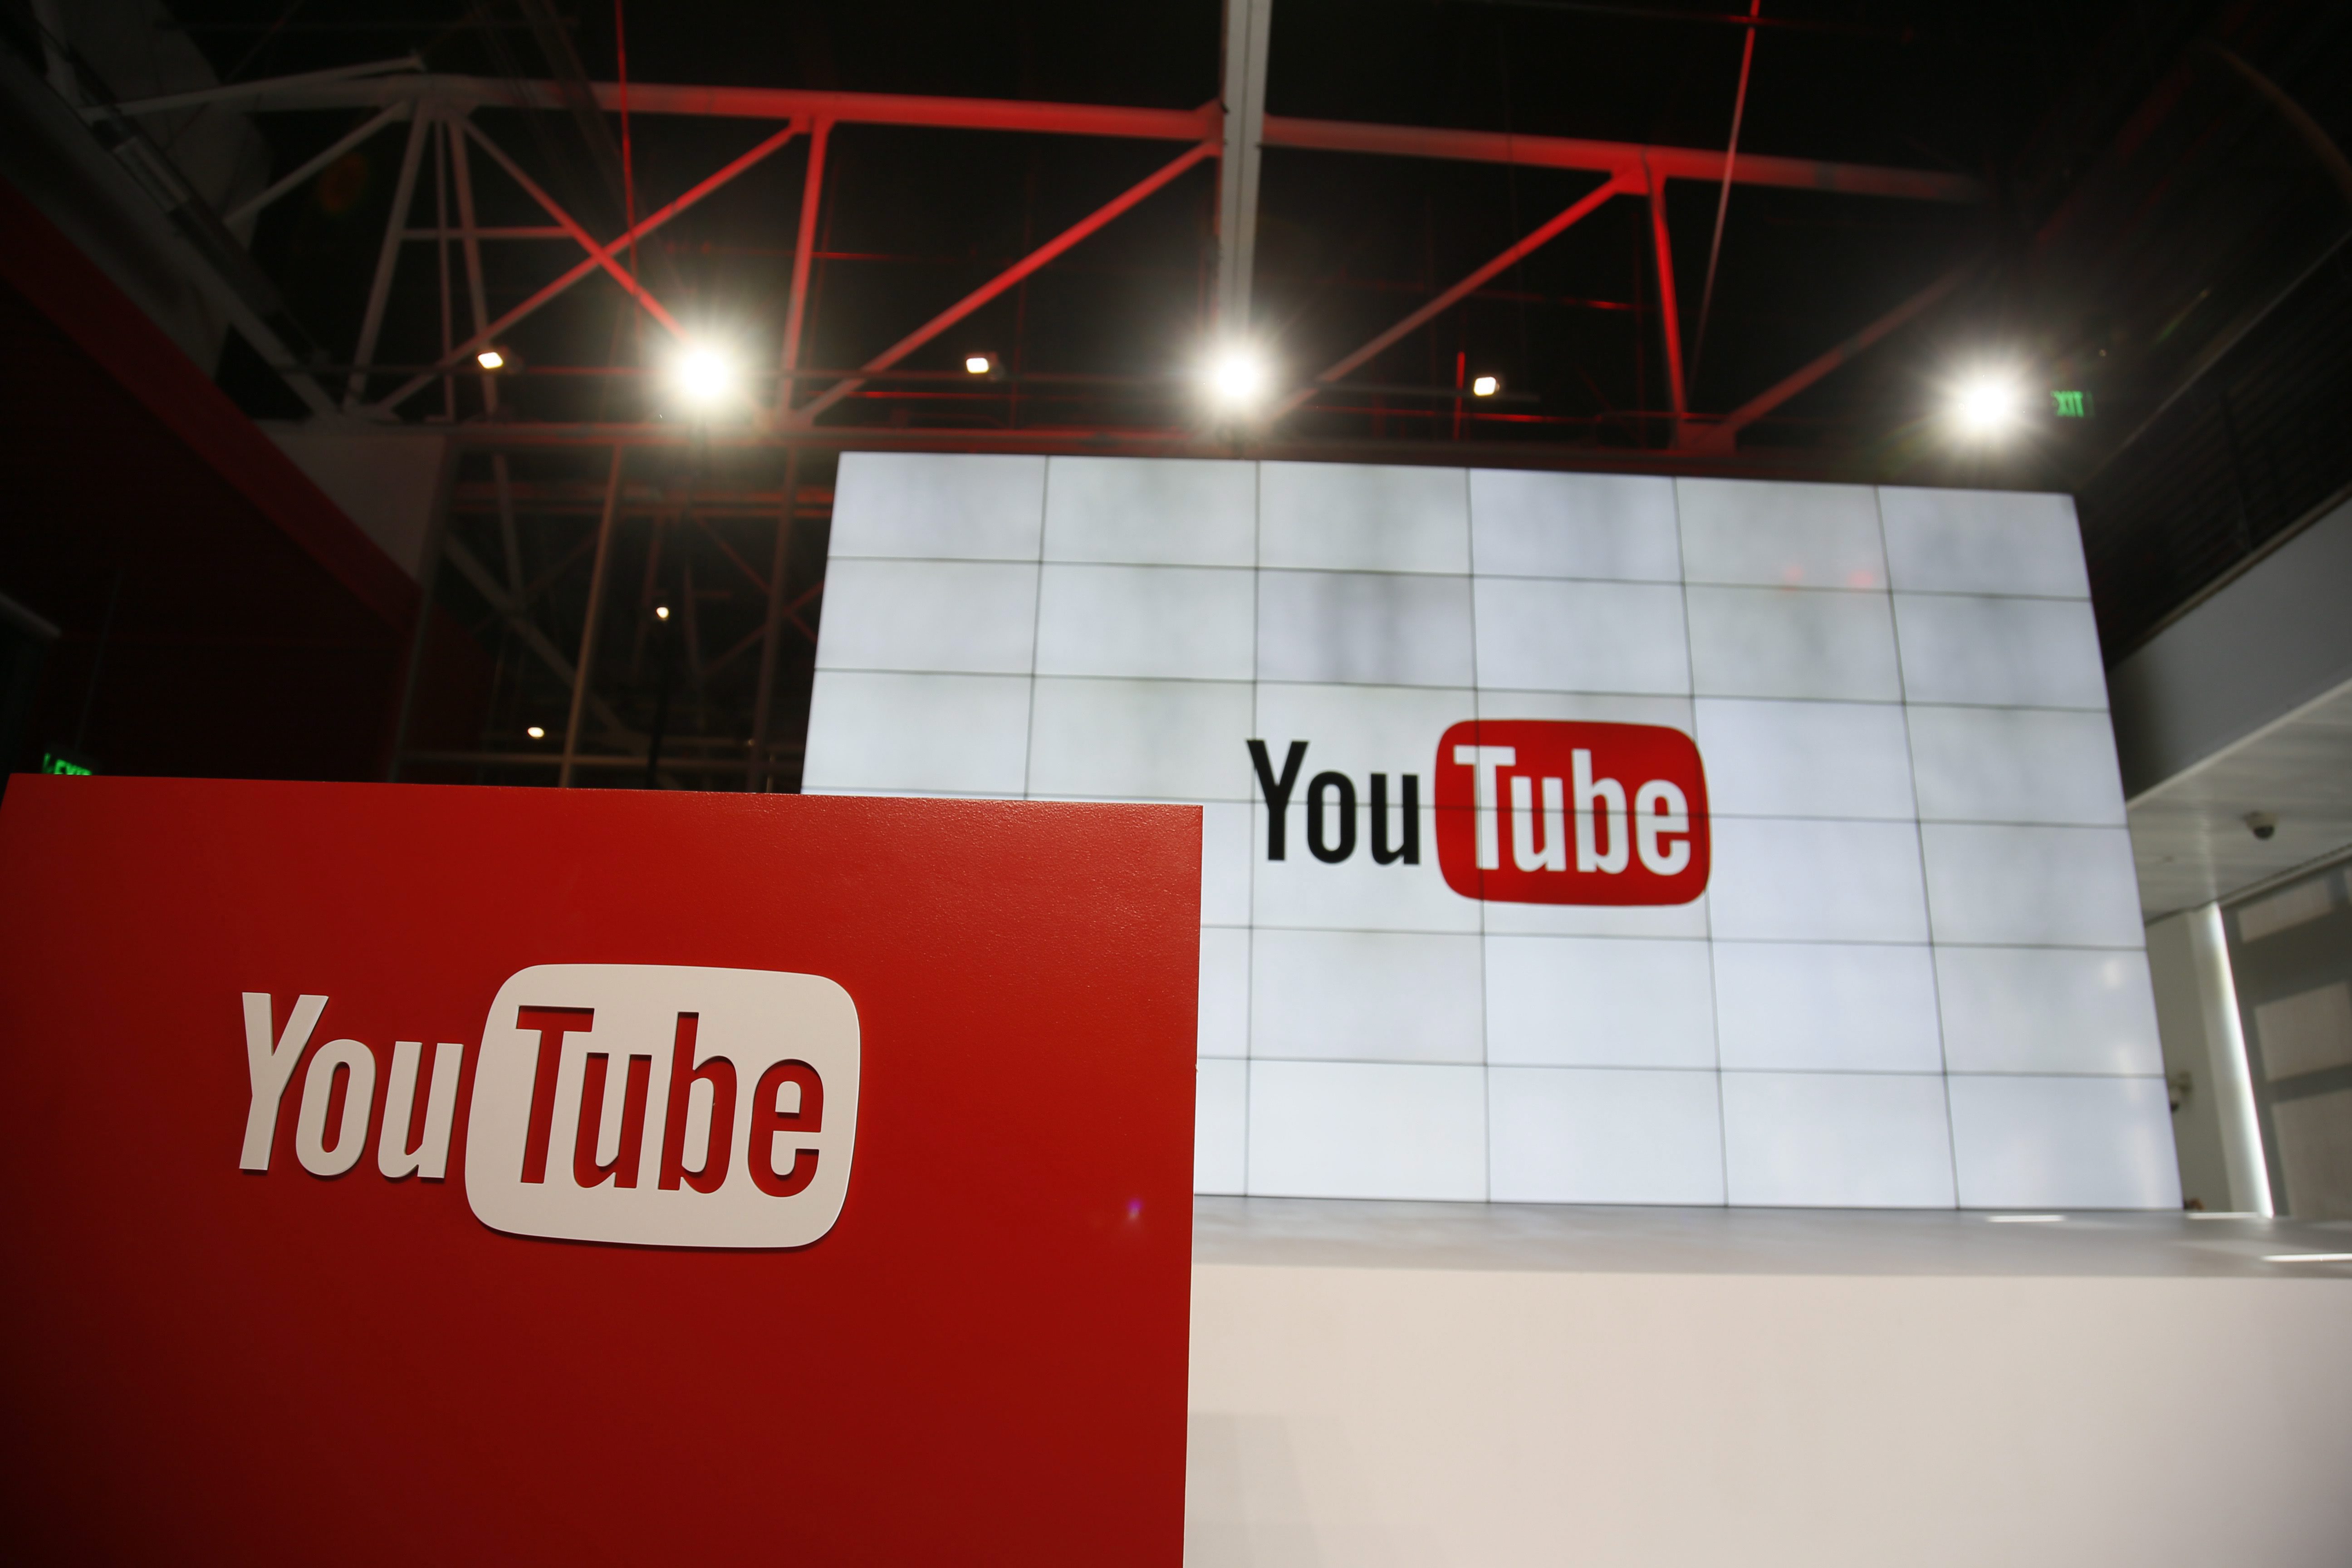 First YouTube space facility in Middle East region opens in Dubai